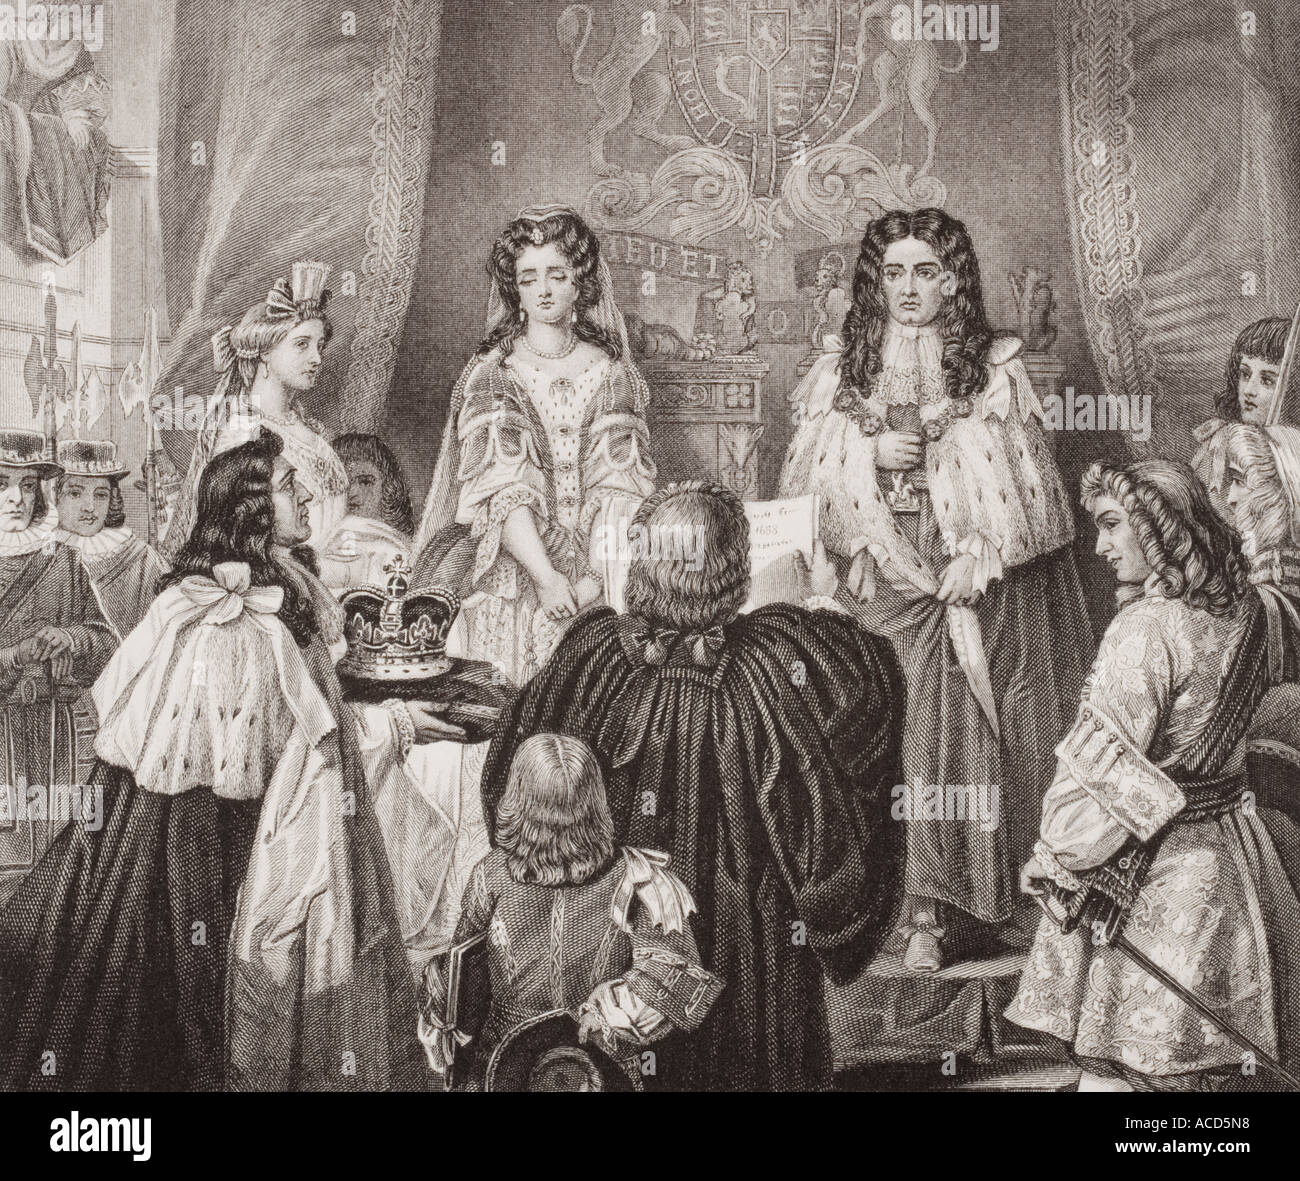 The crown offered to William and Mary. William III, Mary II, co rulers of England, Scotland and Ireland. Stock Photo